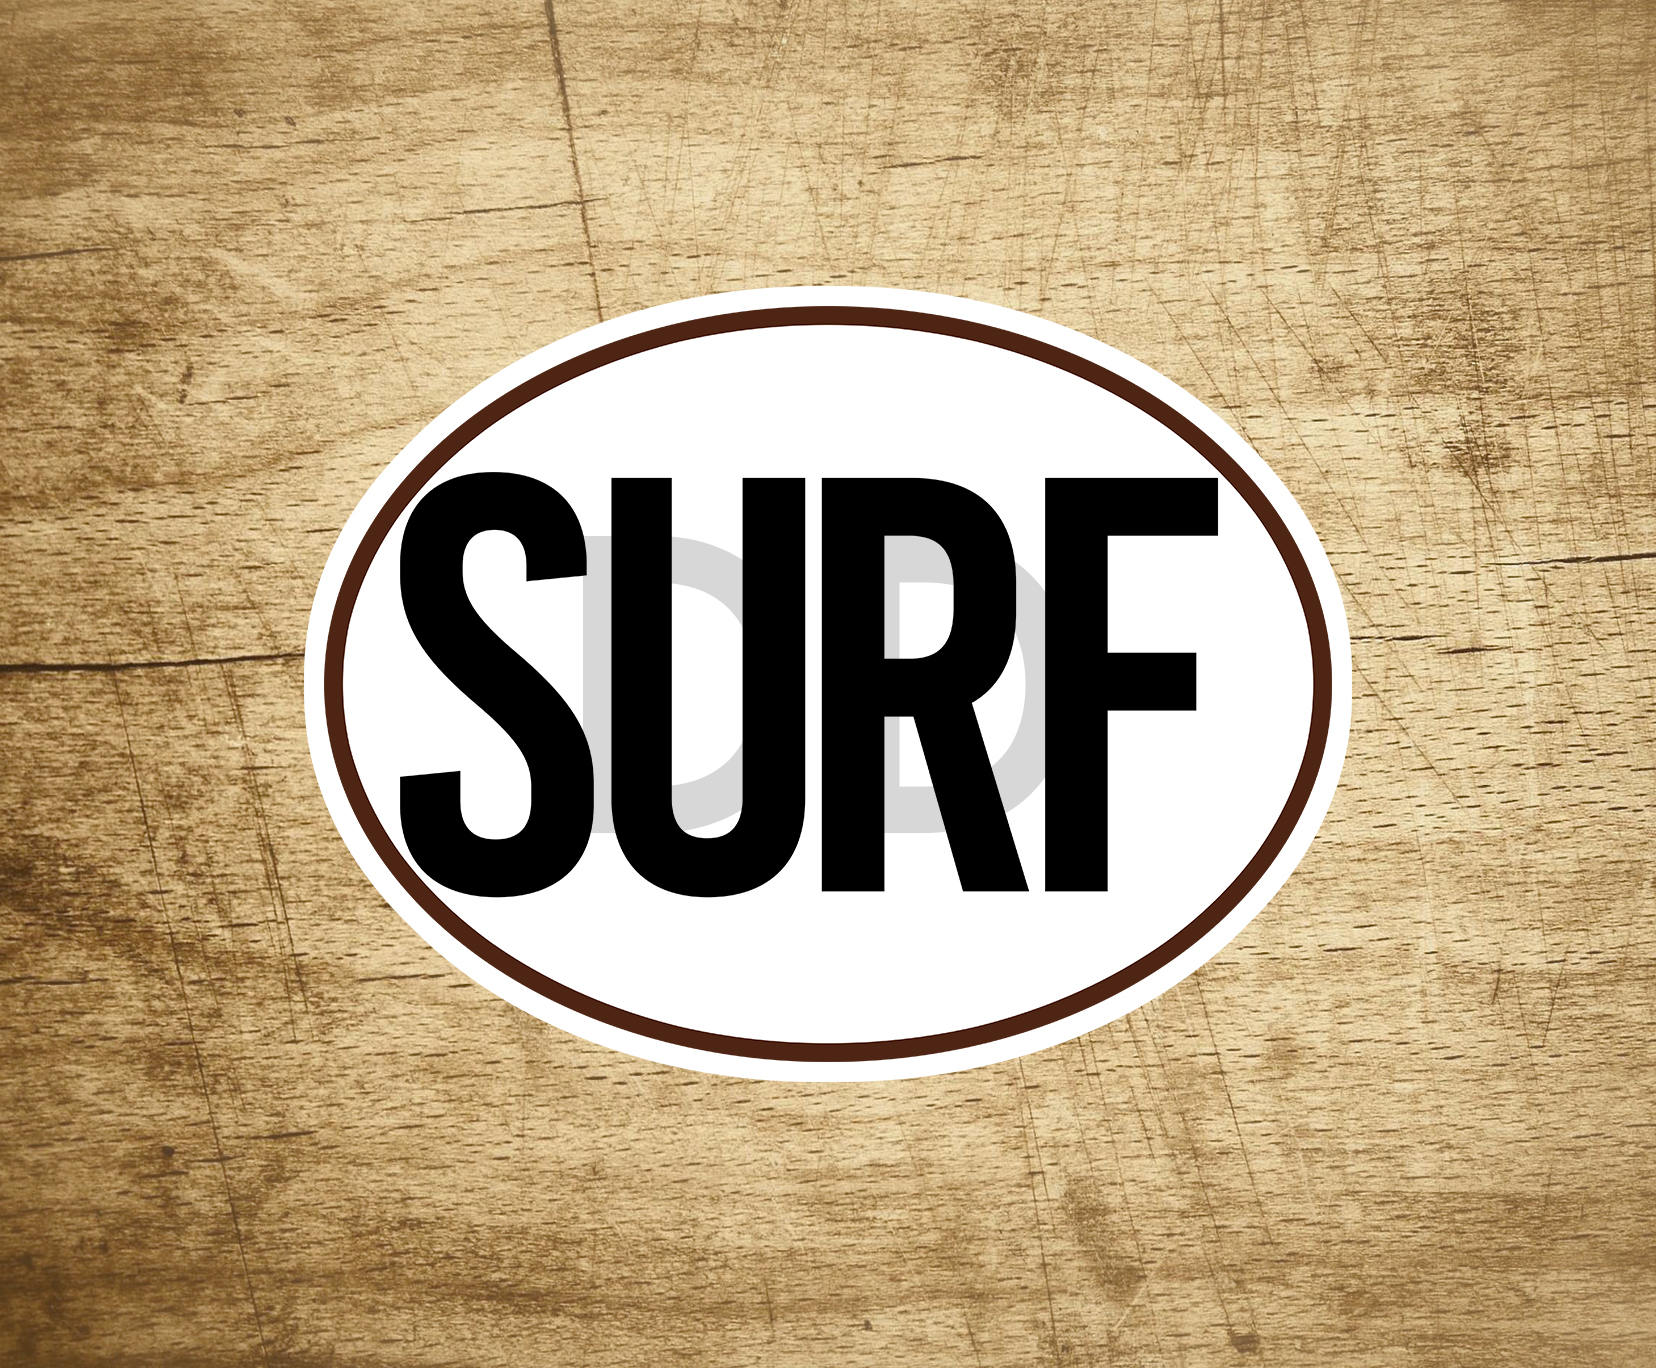 SURF STICKER DECAL Black And White Oval Surfing Surfer  4" x 3" Euro